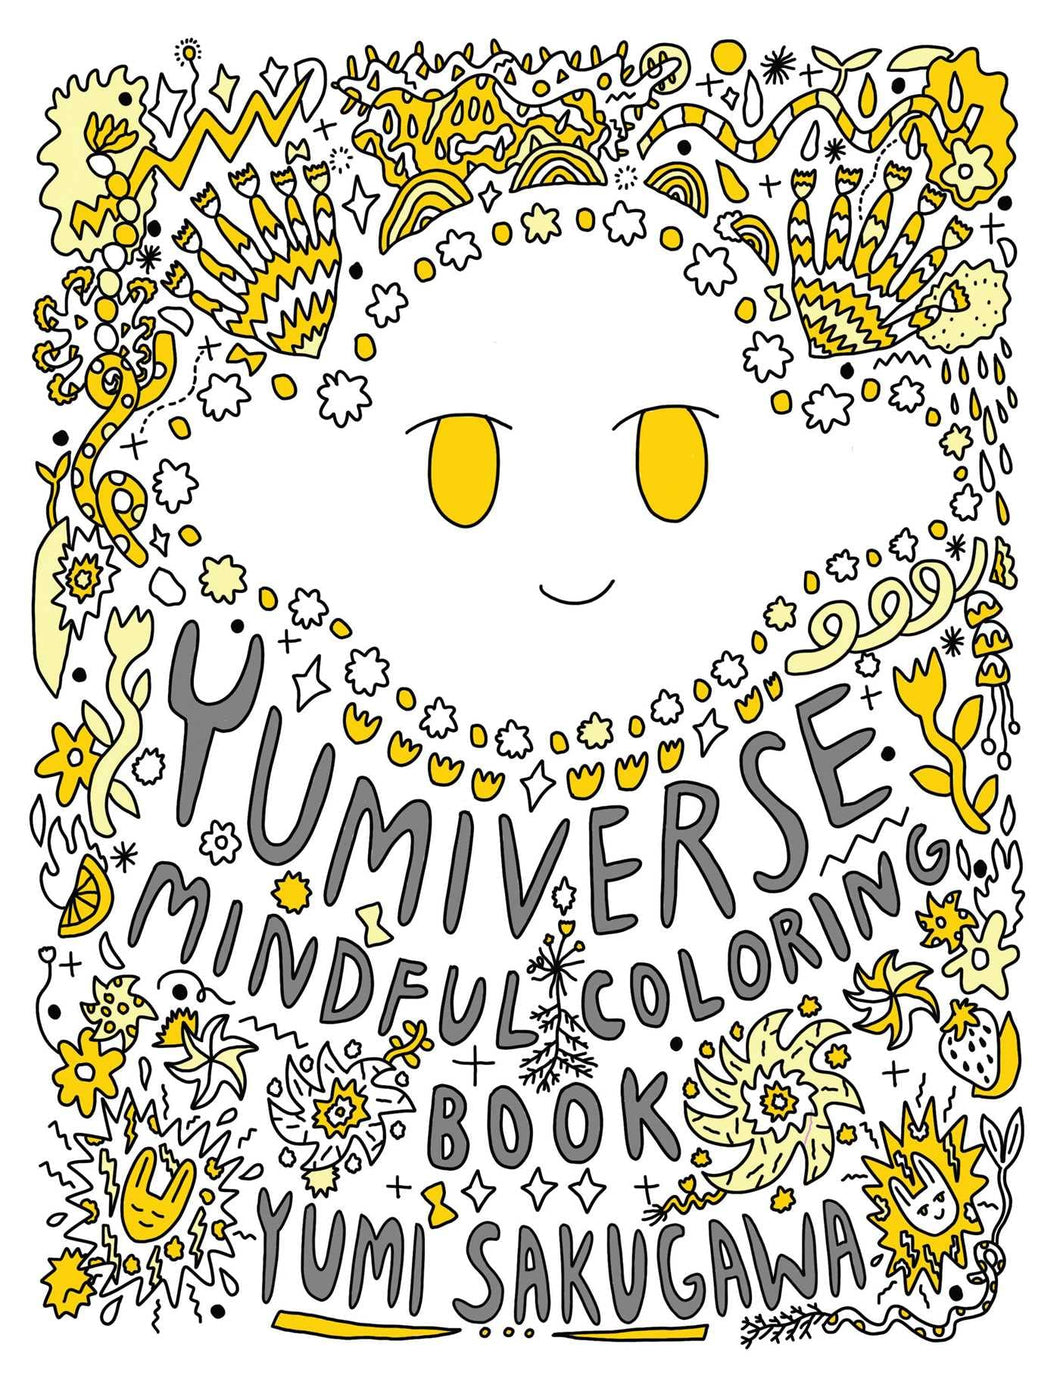 Mindfulness Coloring Book for Children: coloring books for kids